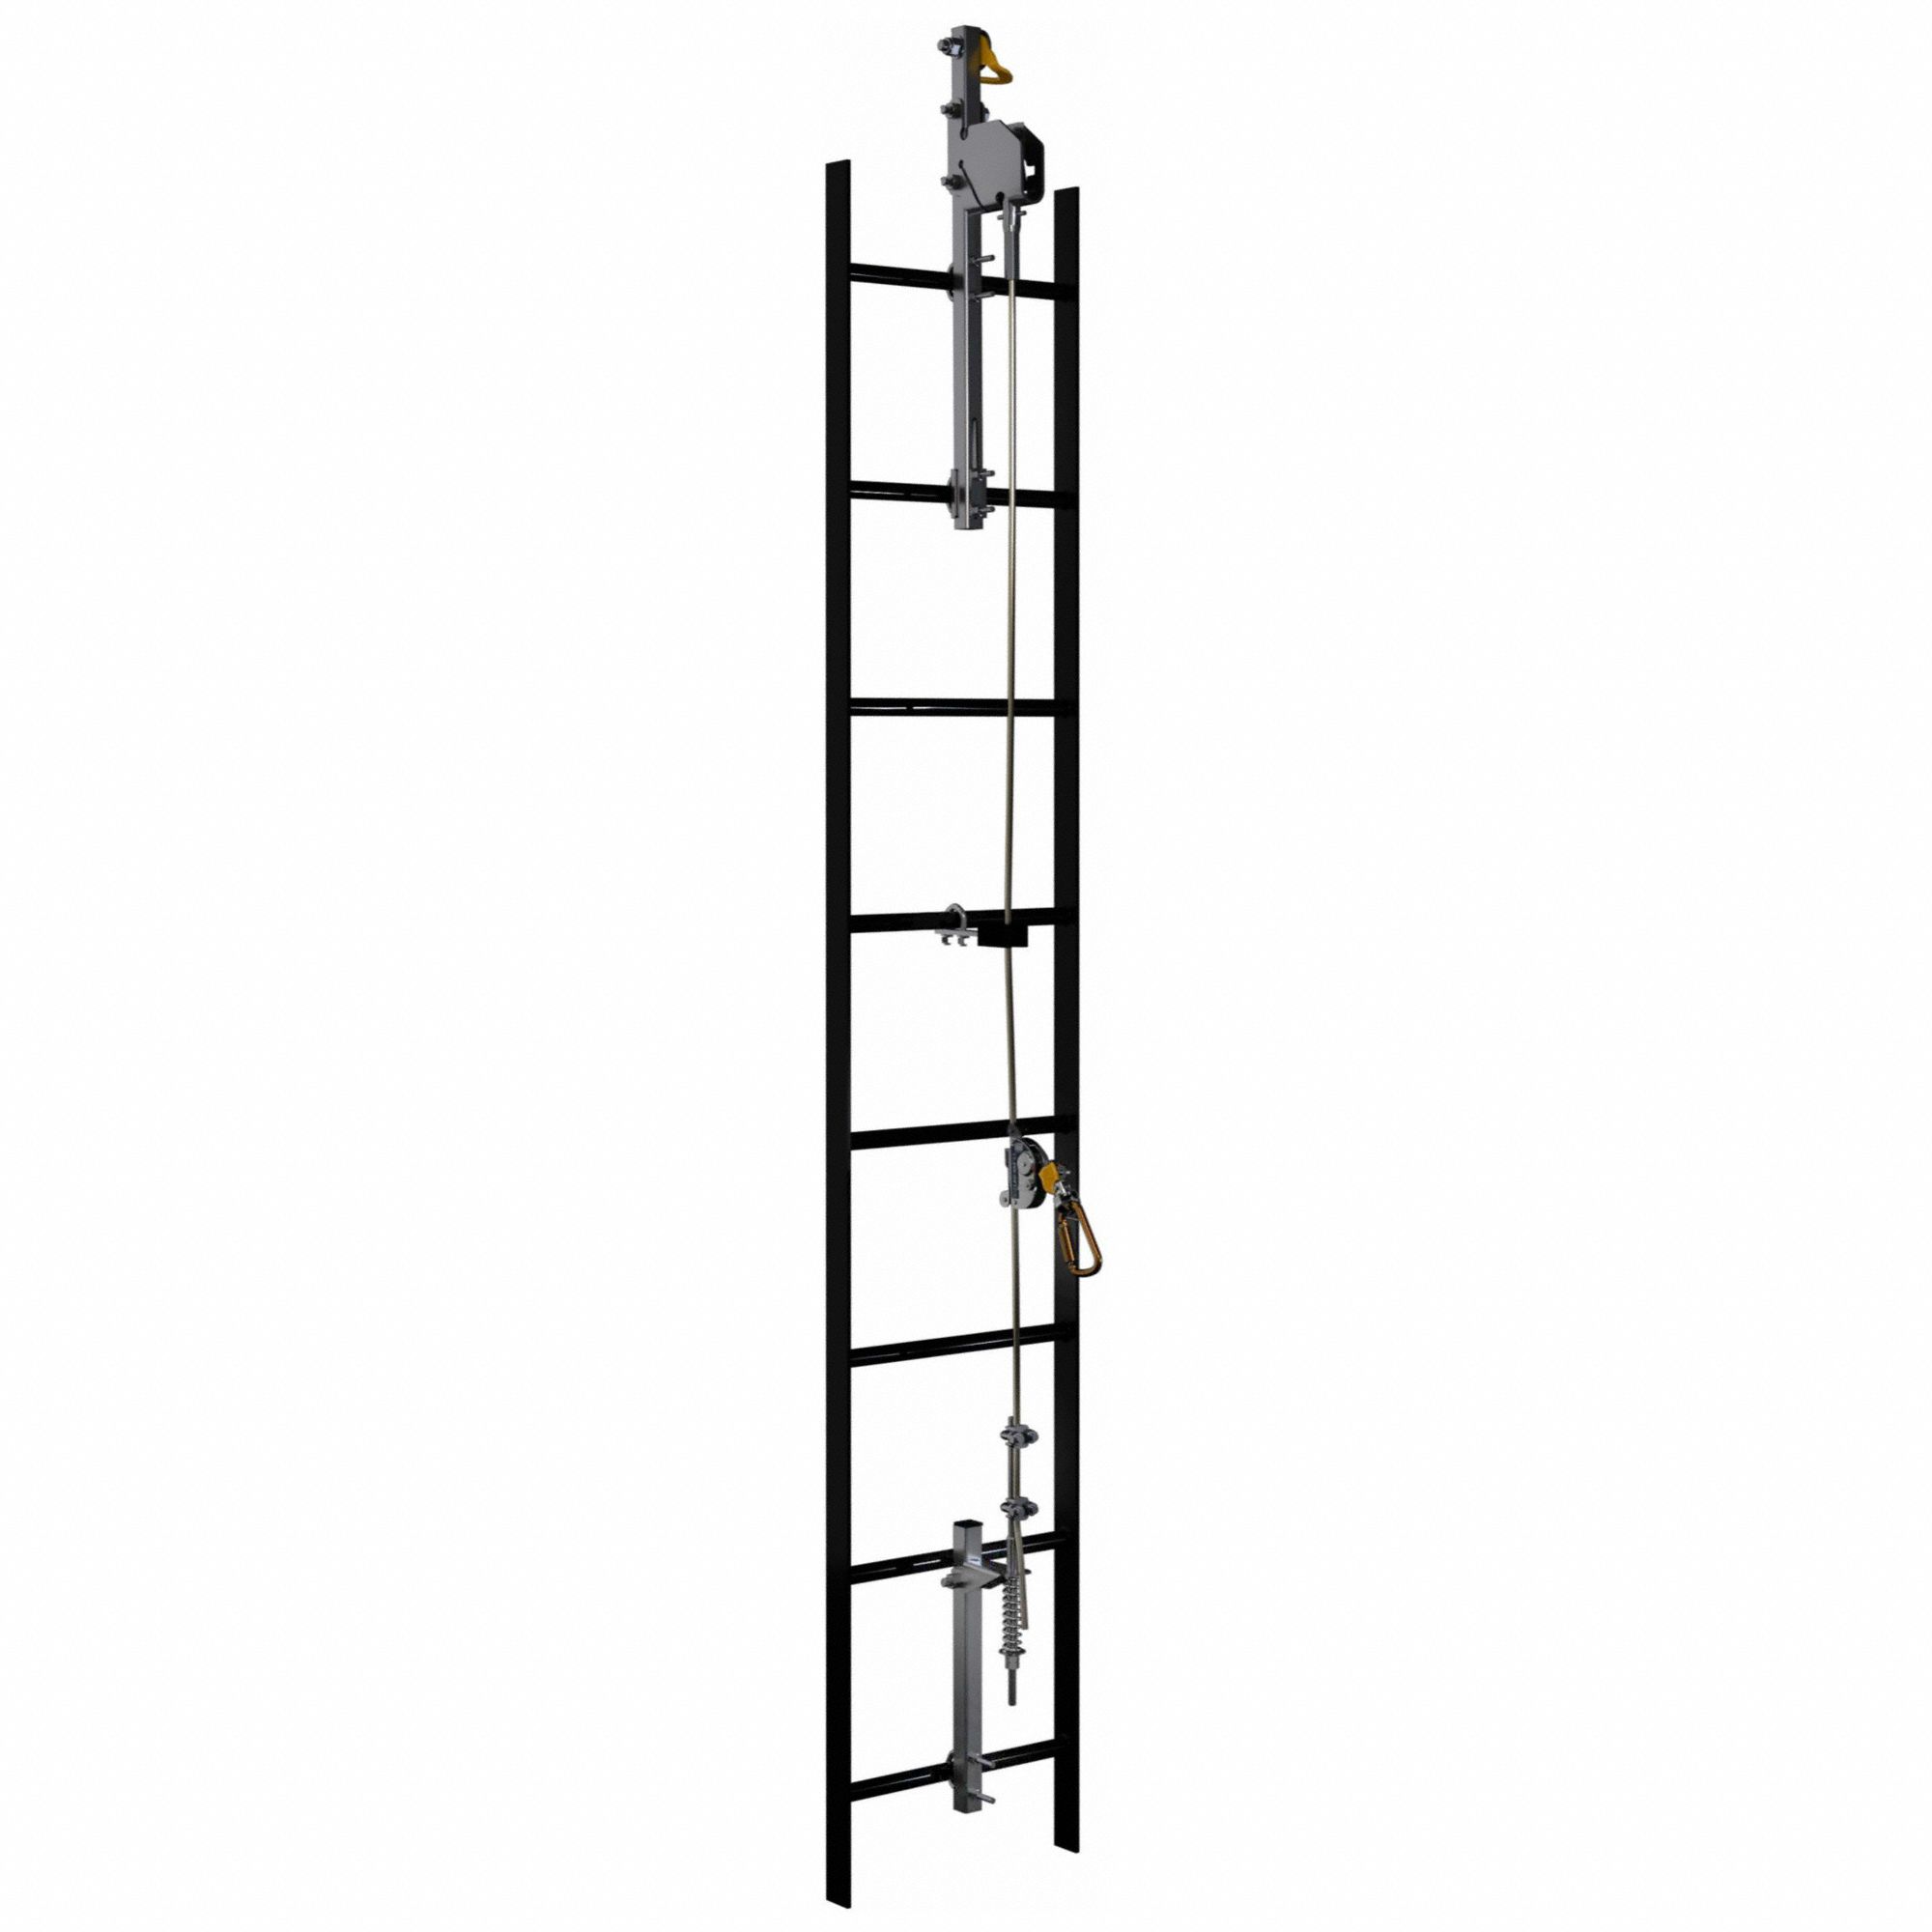 Cable Vertical Safety System: 620 lb Wt Capacity, Galvanized Steel, 2 Workers per System